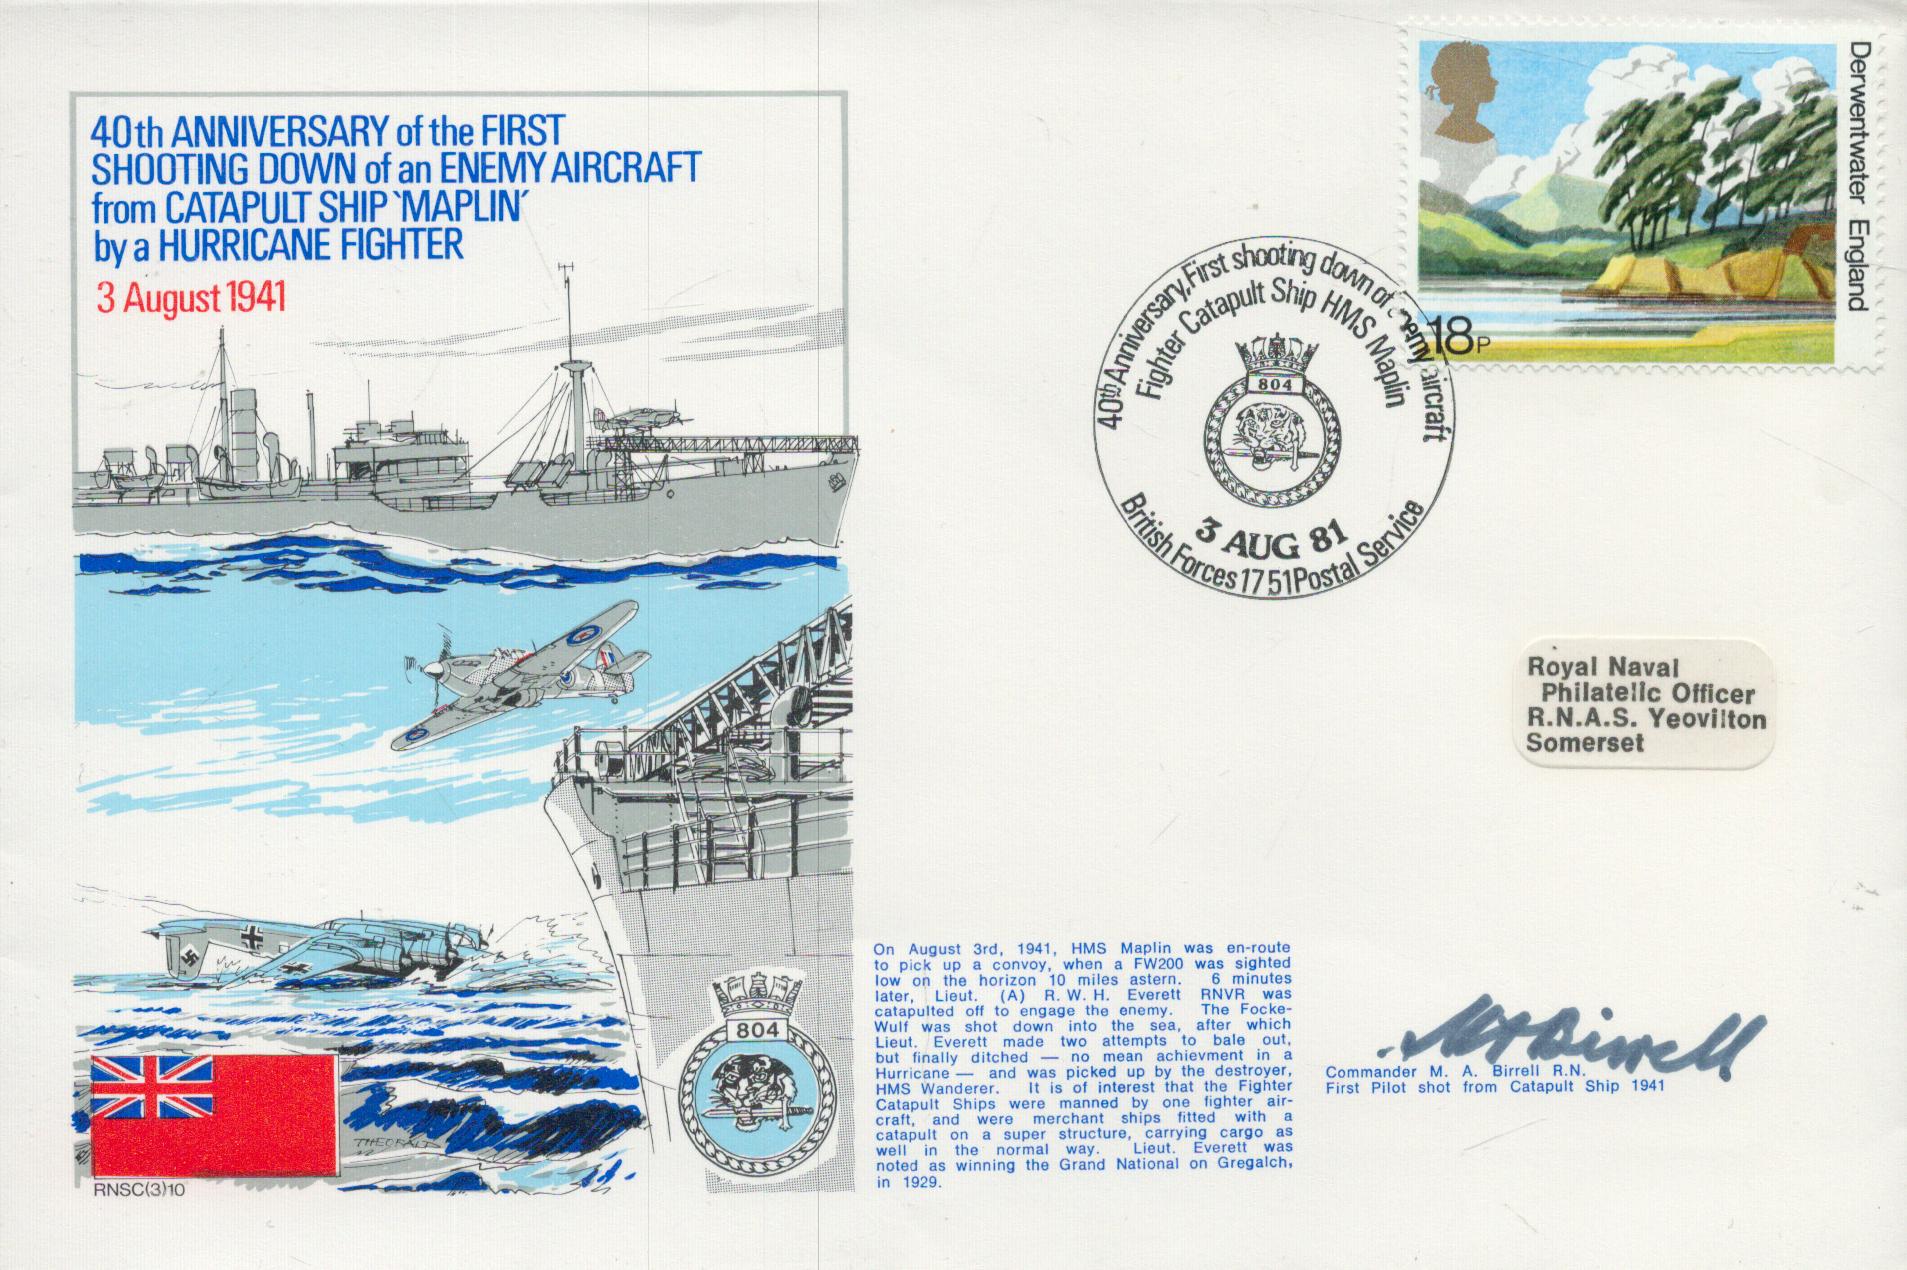 Rare Battle of Britain pilot Cdre M Birrell signed 1981 official Navy cover comm, shooting down of